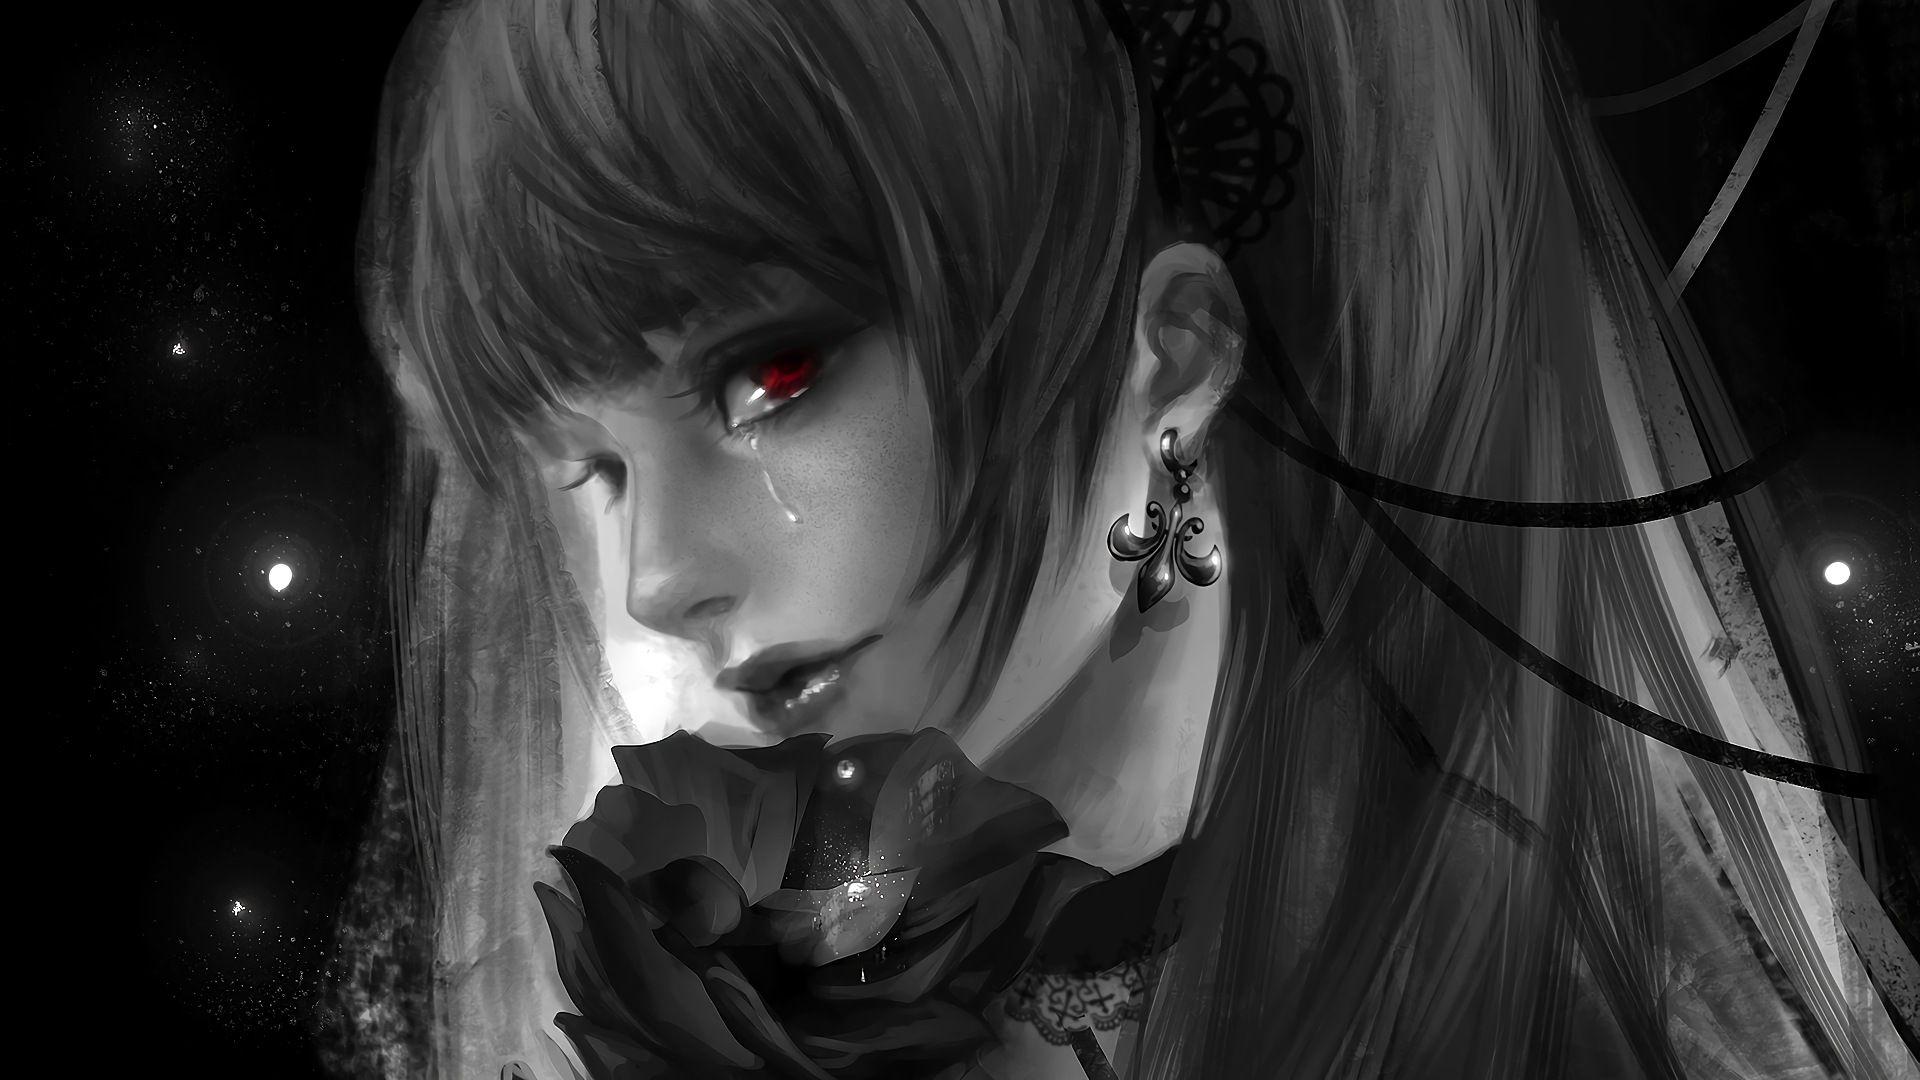 Misa Amane Death Note Black and Whit. Wallpaper